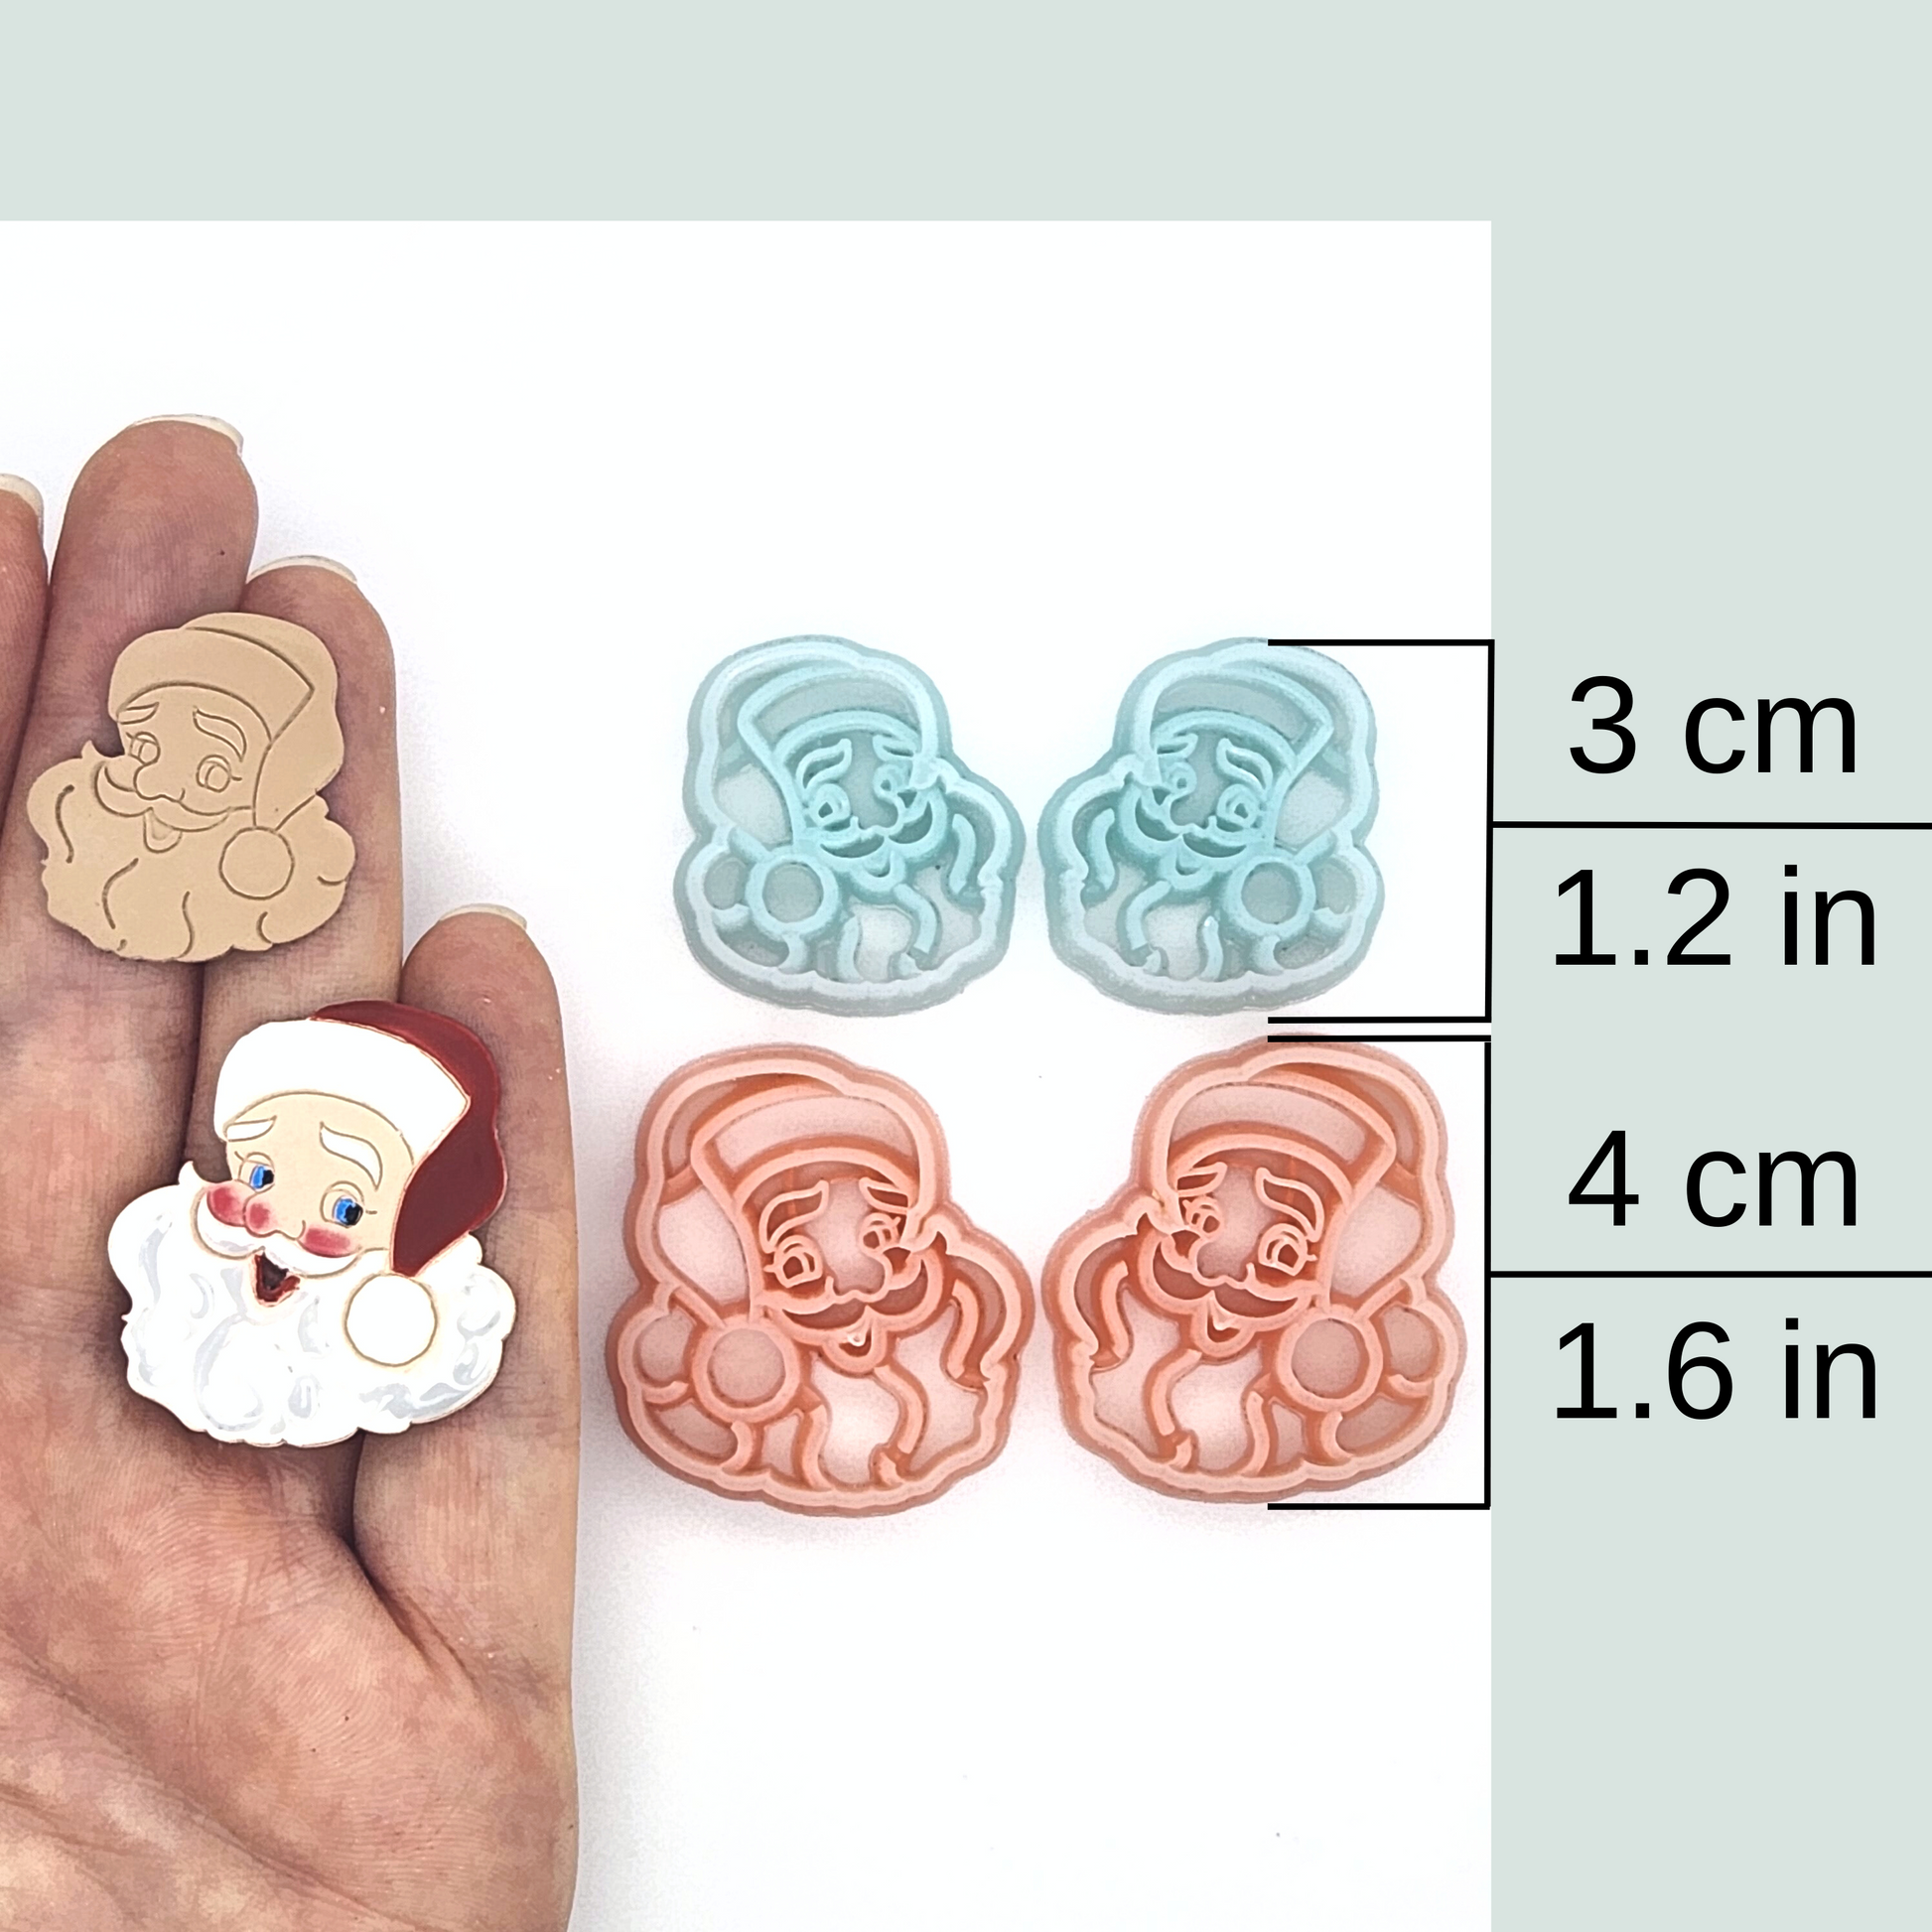 A polymer clay cutter in the shape of Santa Claus, featuring a vintage design. Available sizes: 3cm (1.2in) and 4cm (1.6in).